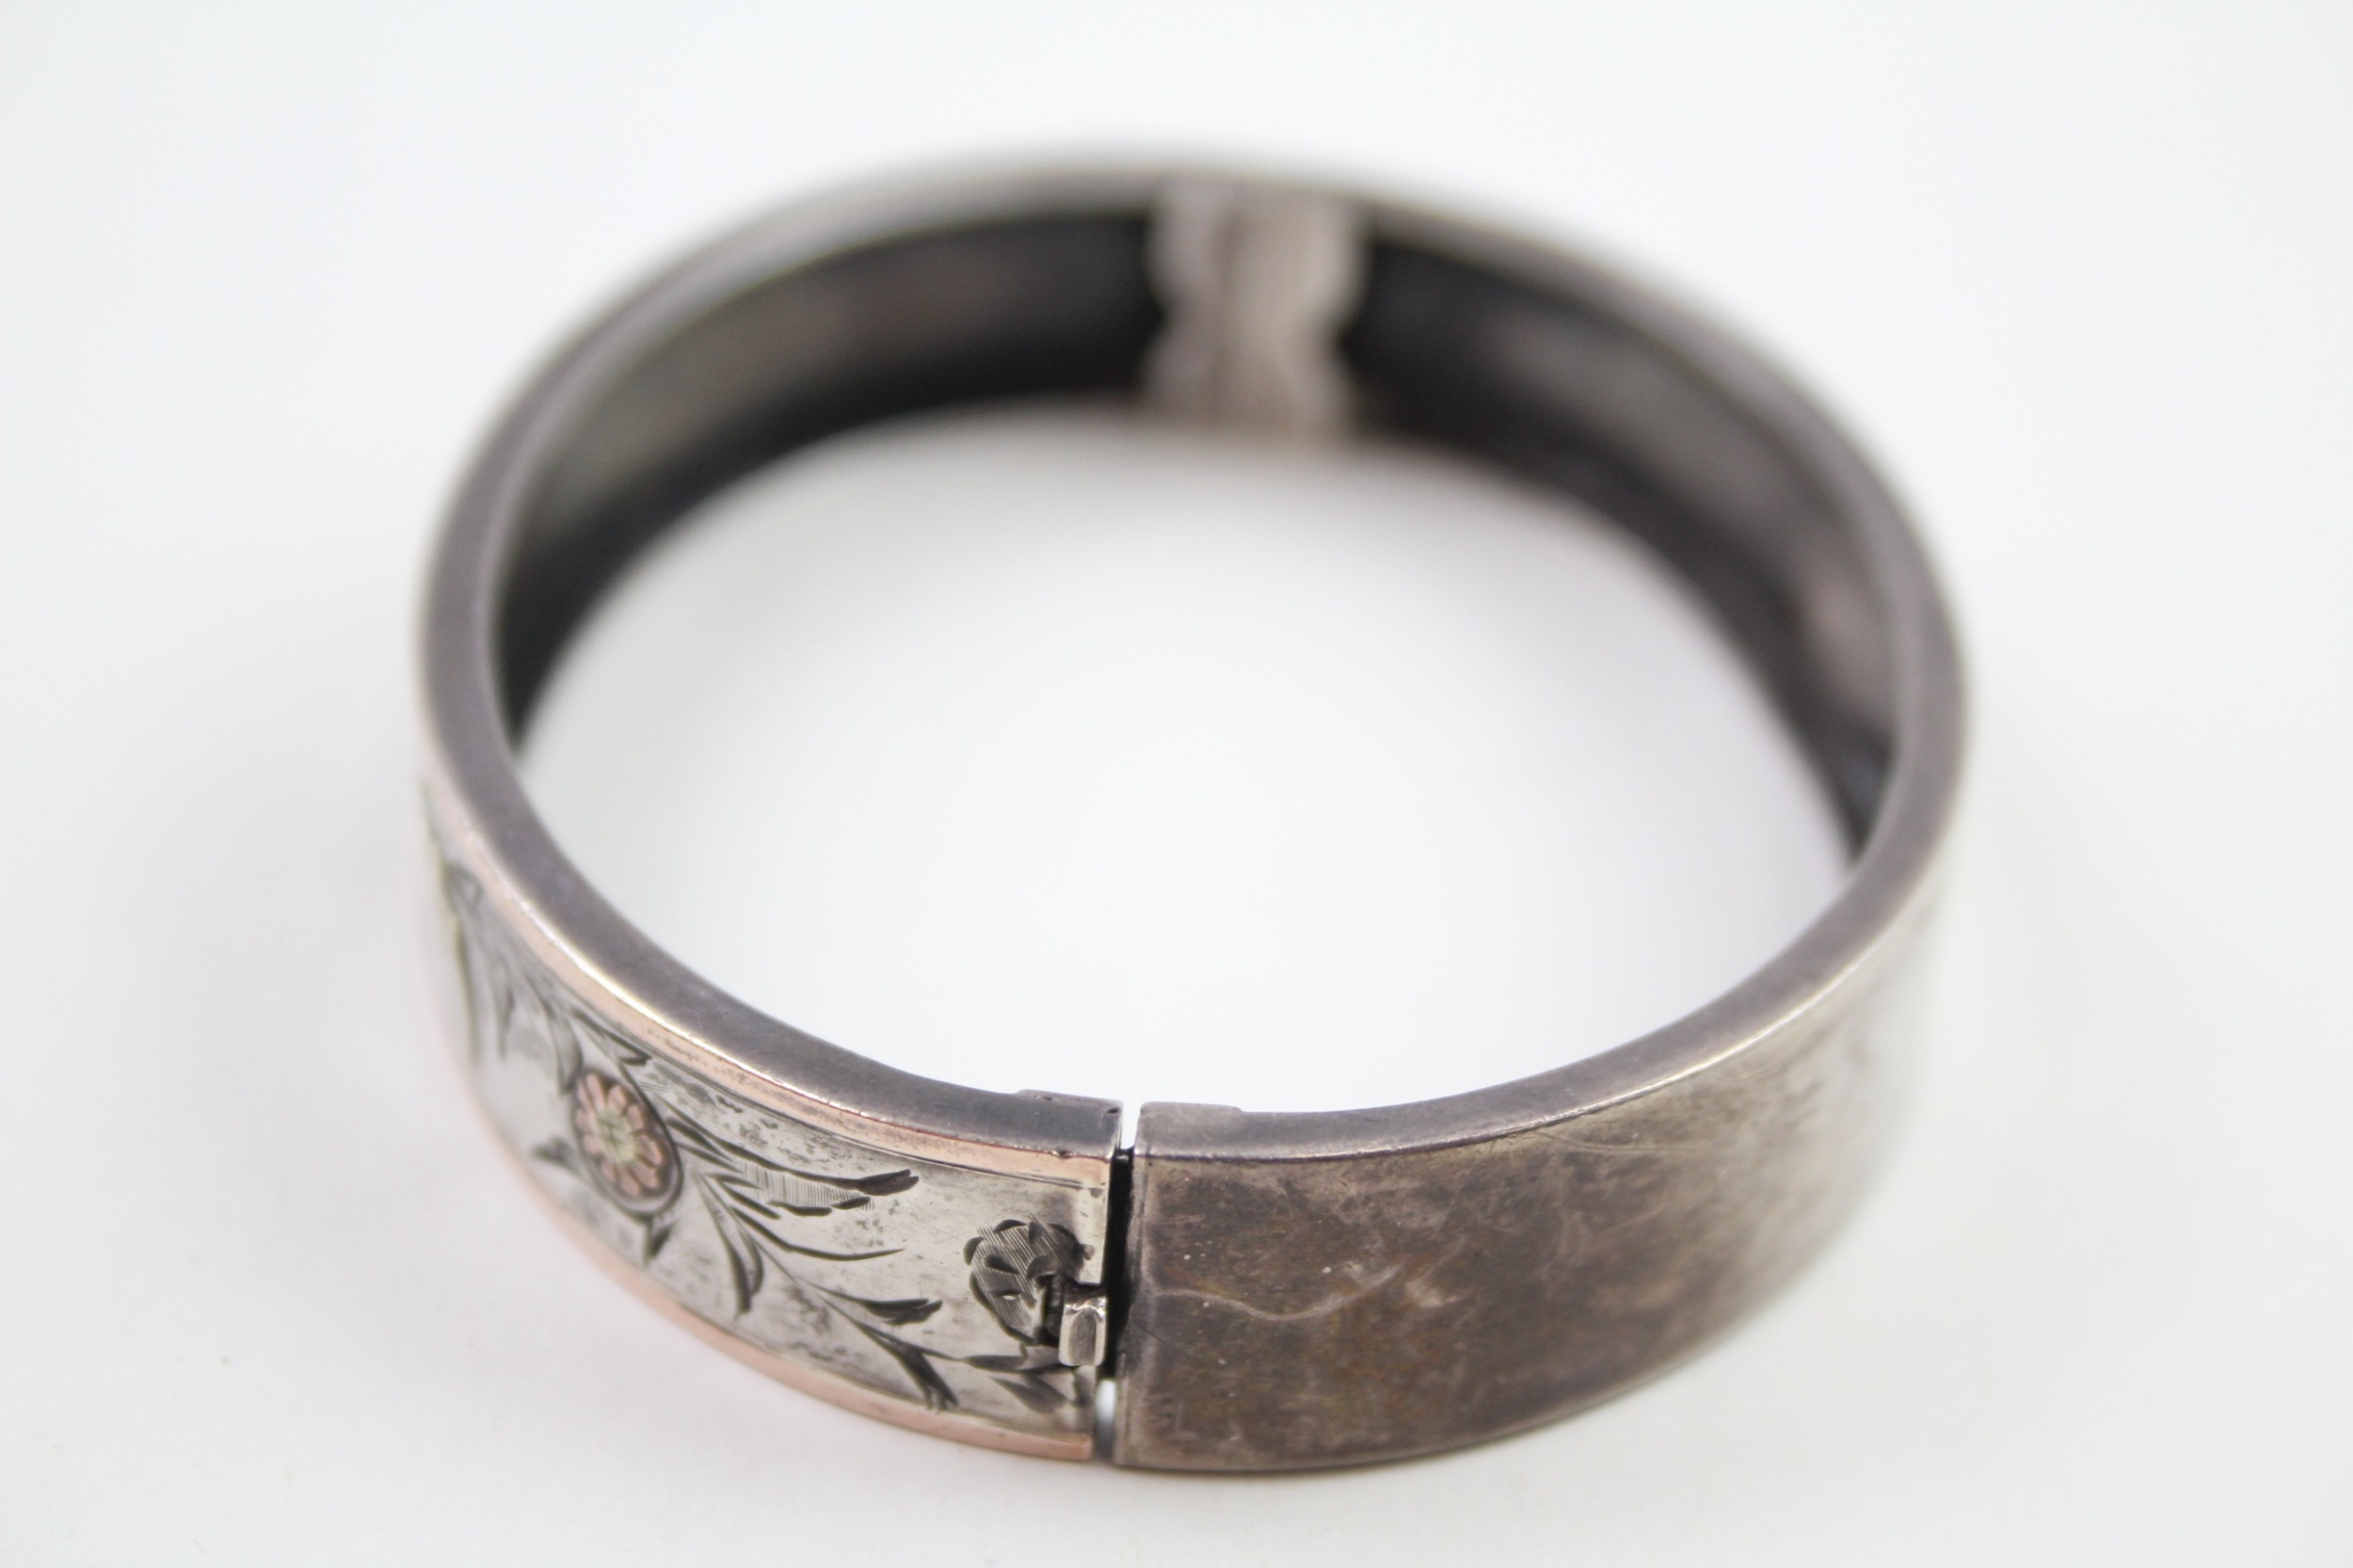 A decorative Victorian silver bangle with gold floral detailing (16g) - Image 4 of 6